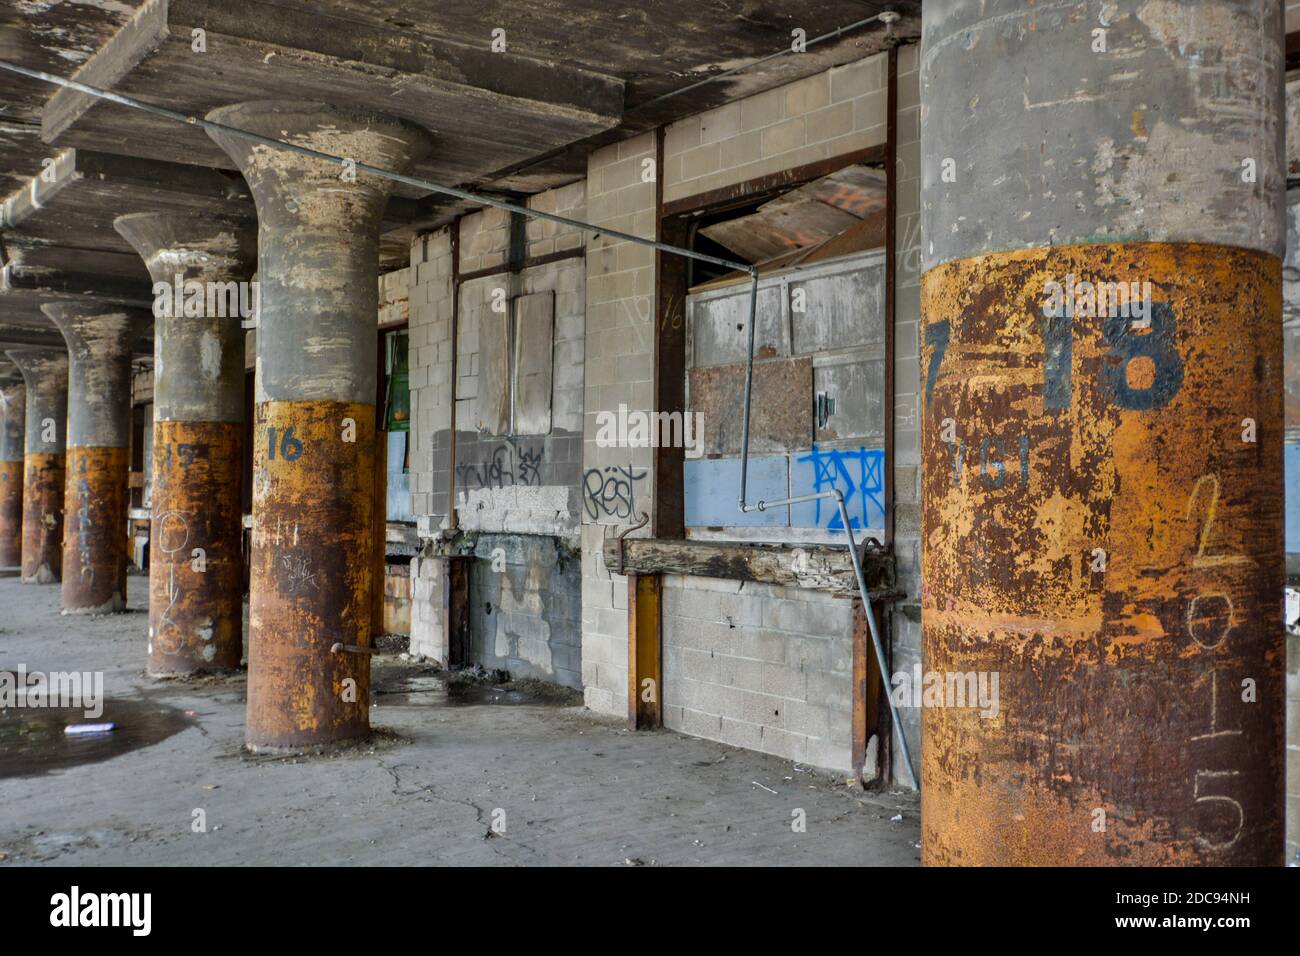 Old and abandoned warehouse loading docks that are falling apart and desolate Stock Photo